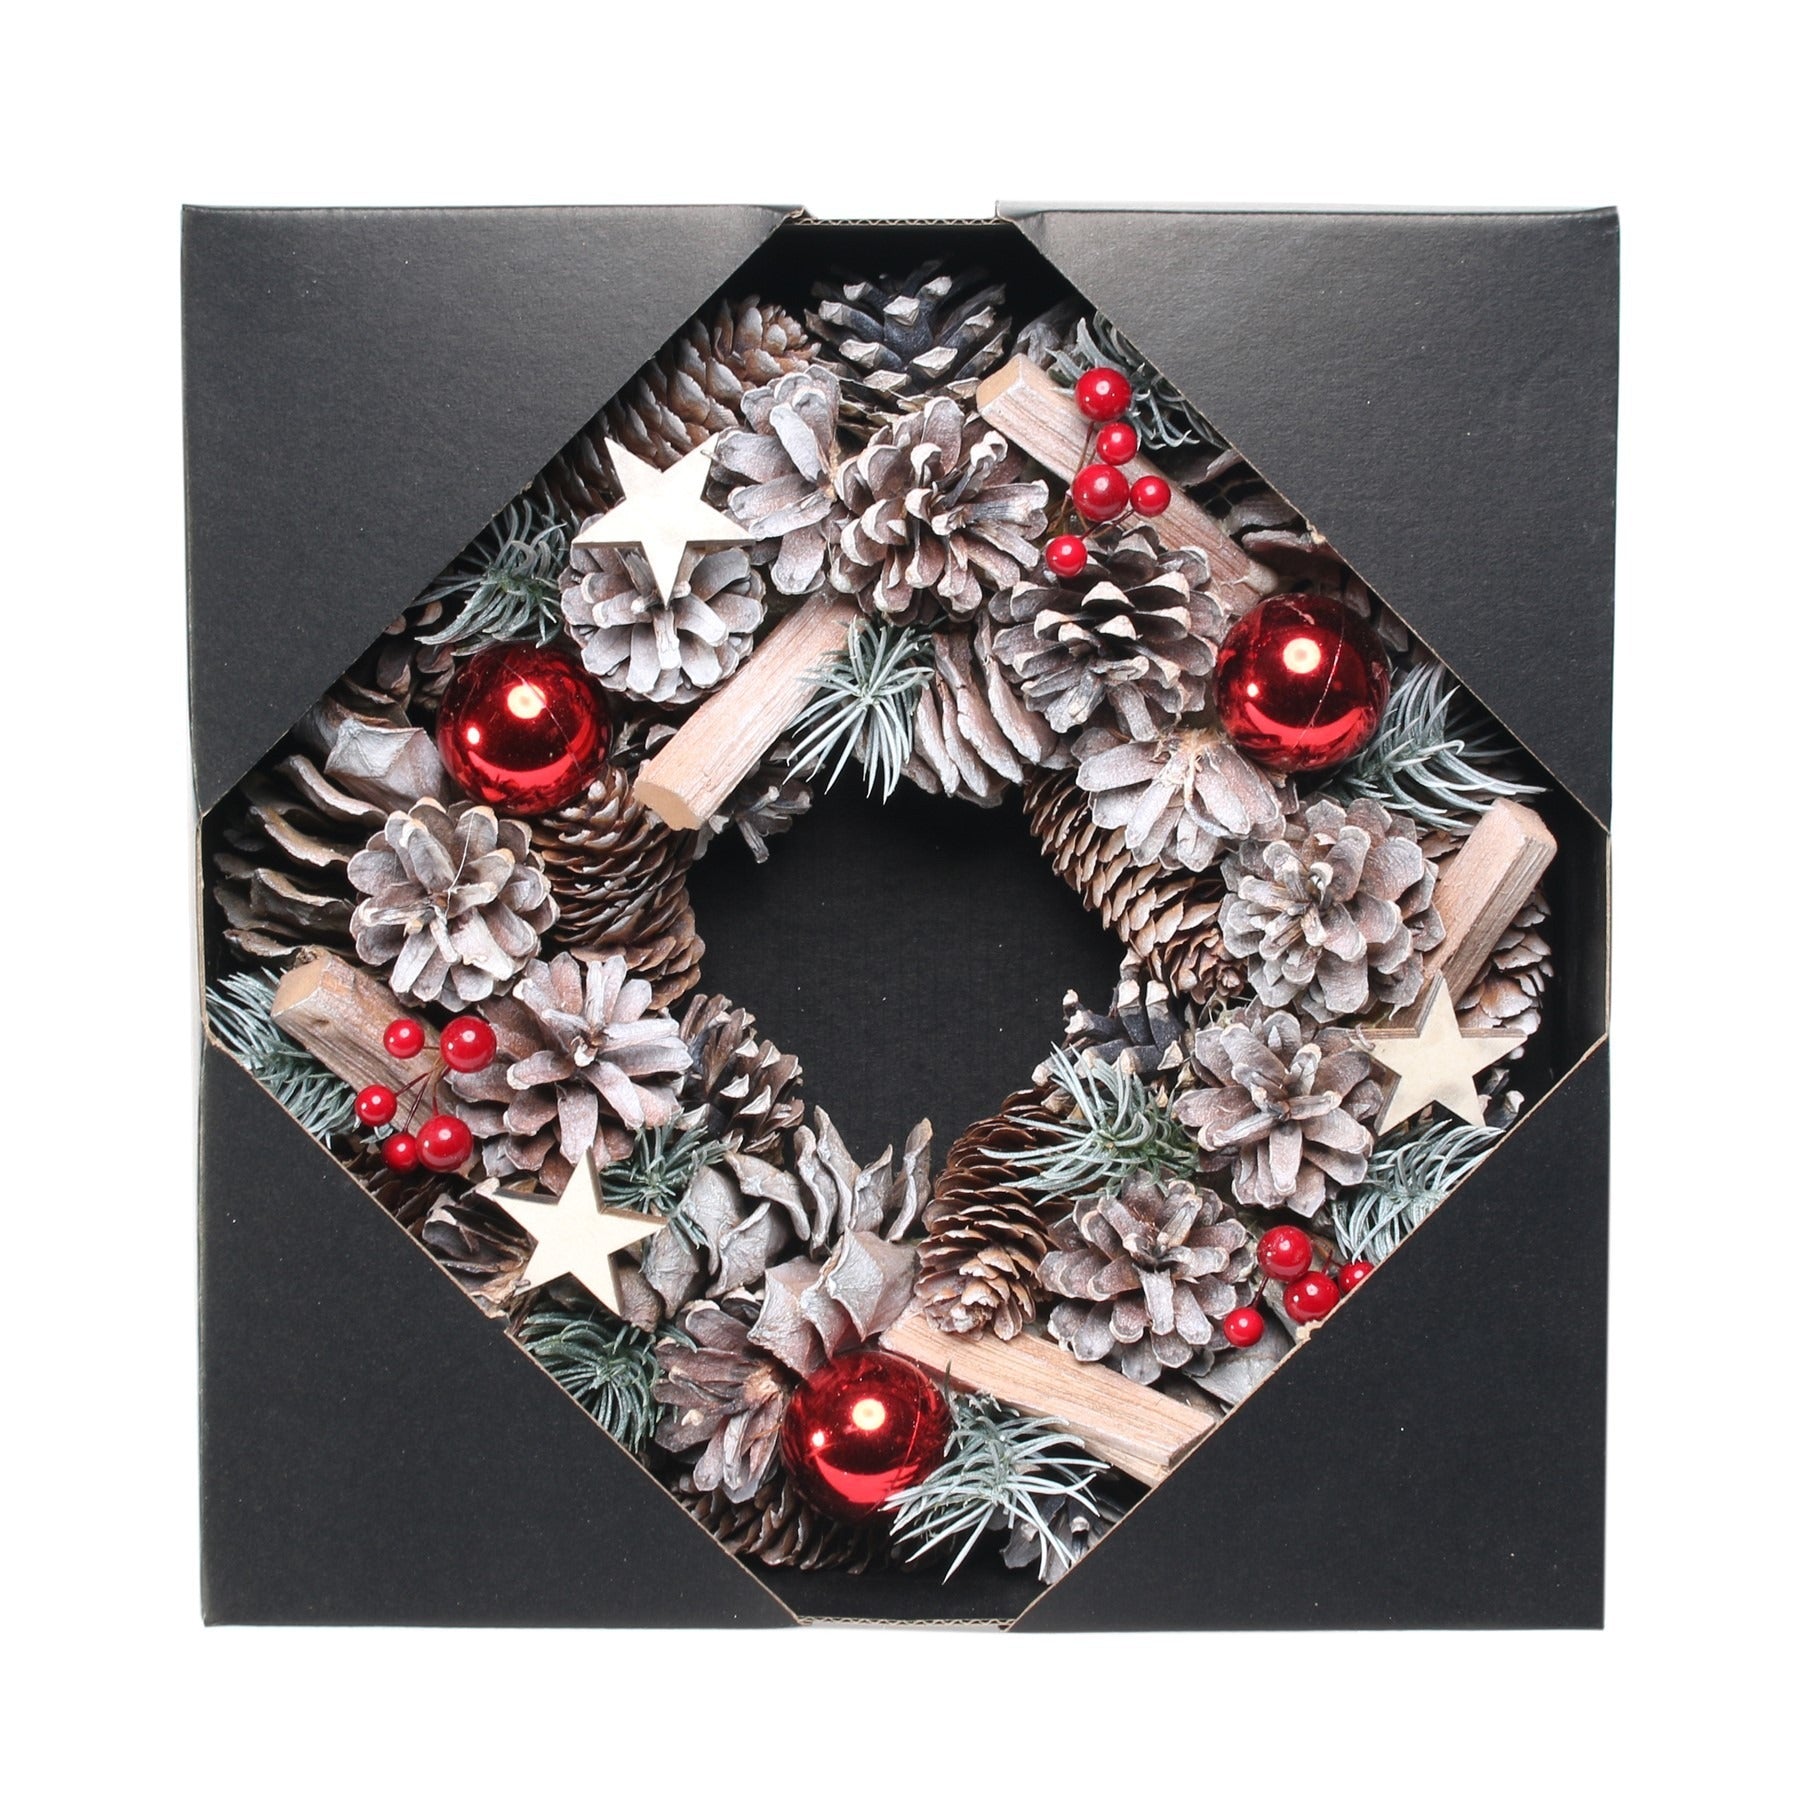 View Woodland Snow Wreath with Red Baubles information